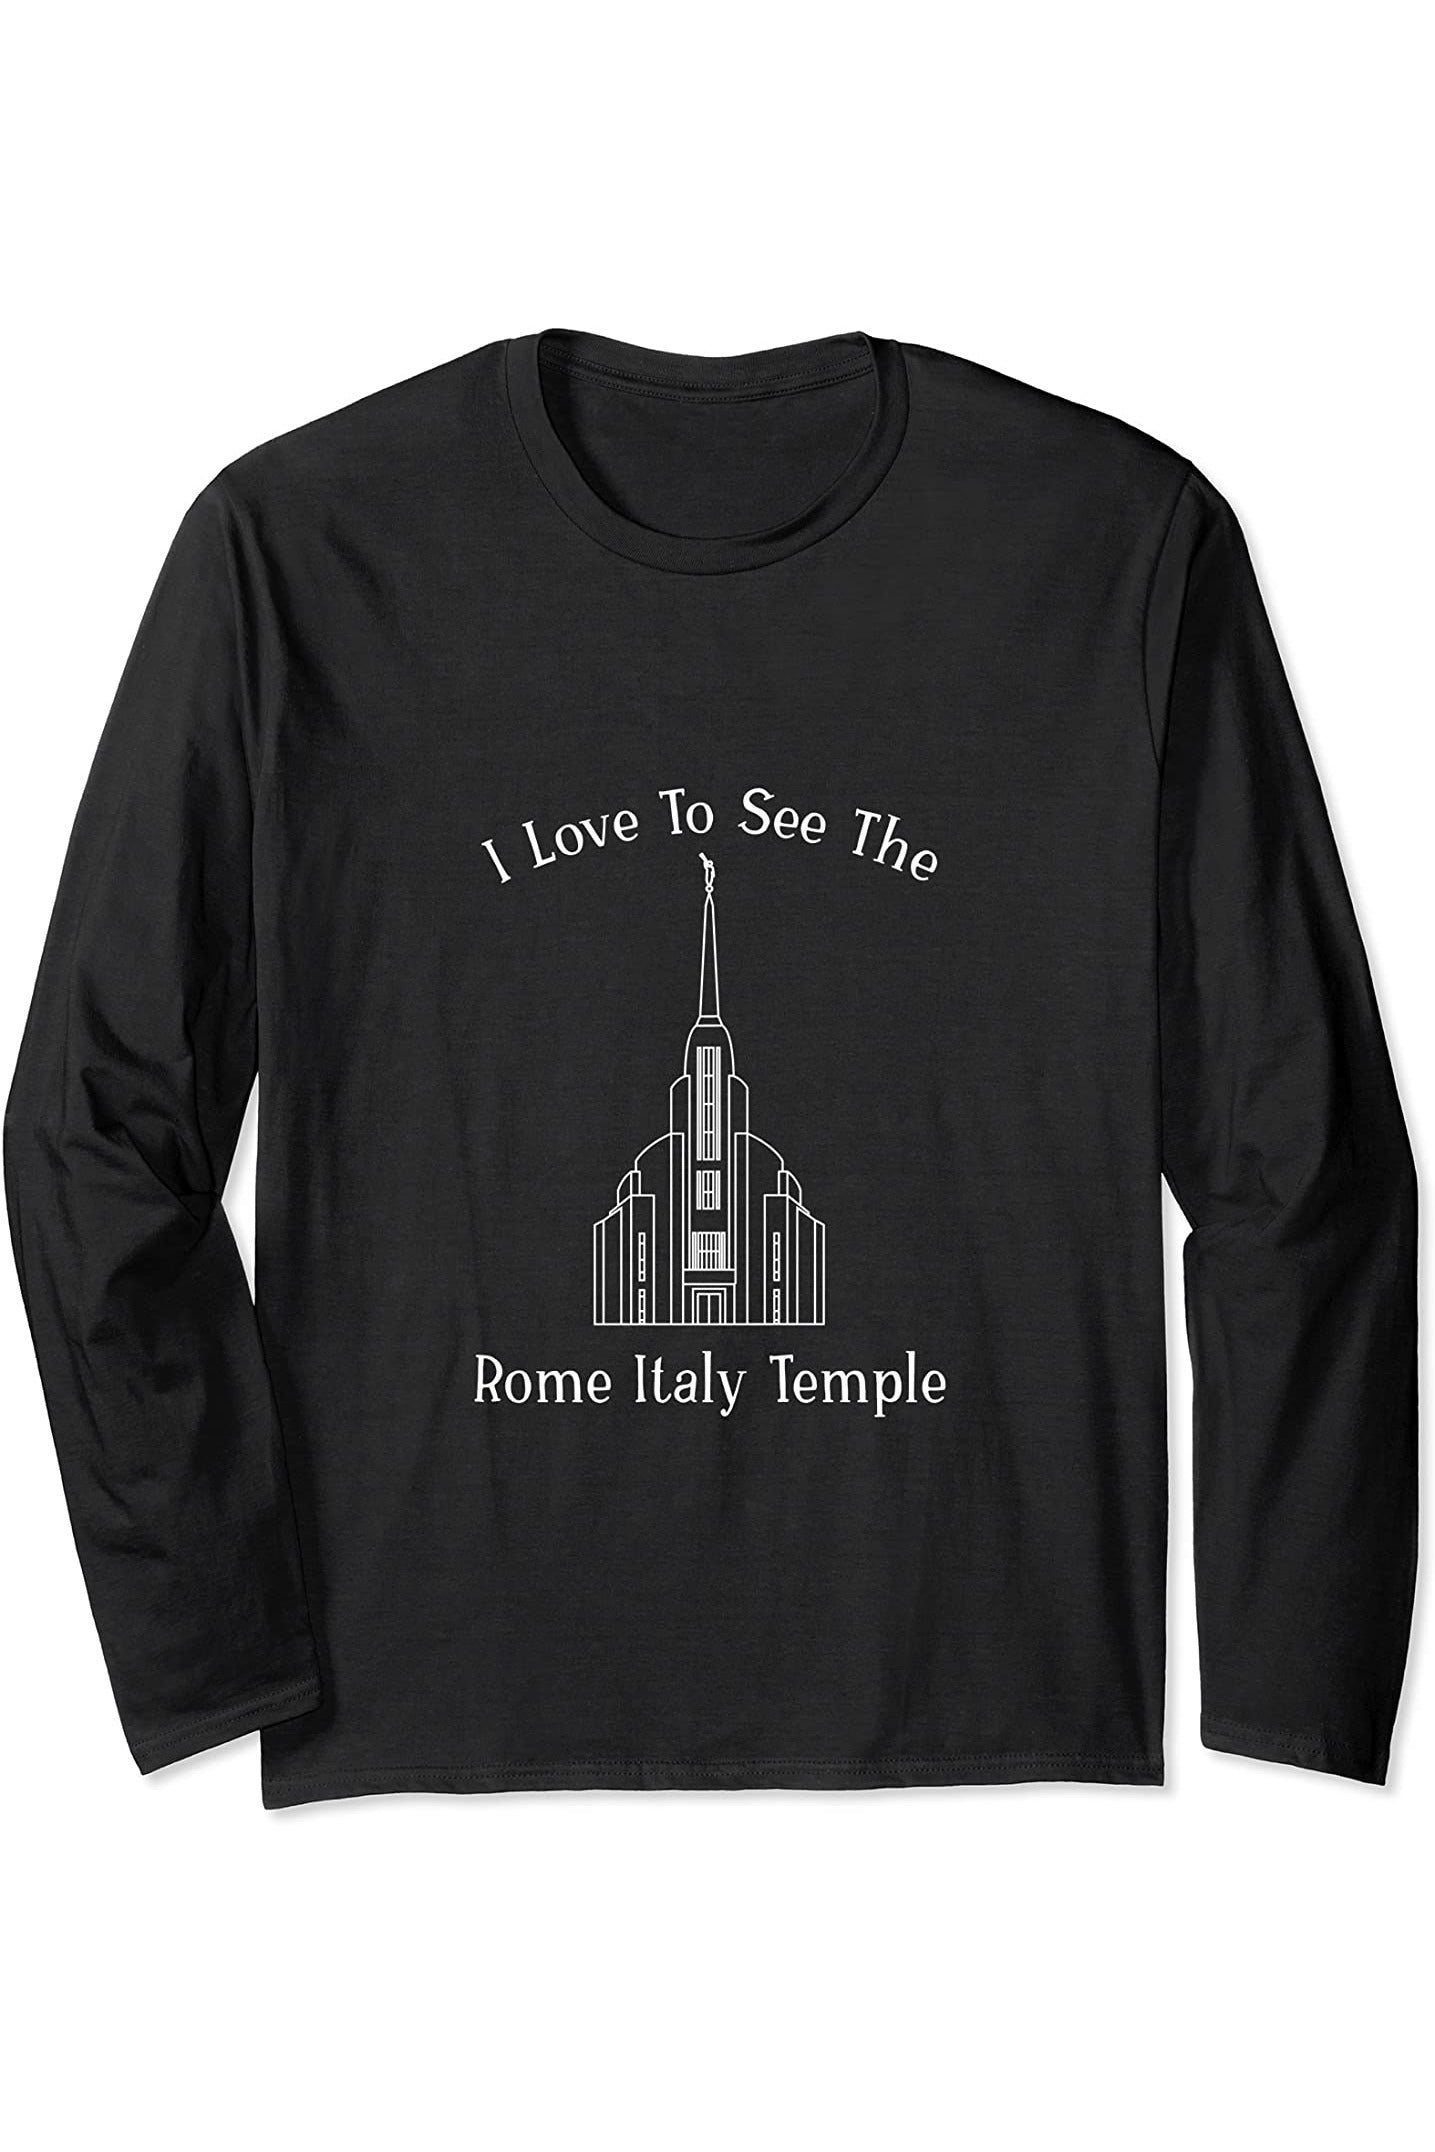 Rom Italy Temple, I love to see my Temple, happy Long Sleeve T-Shirt